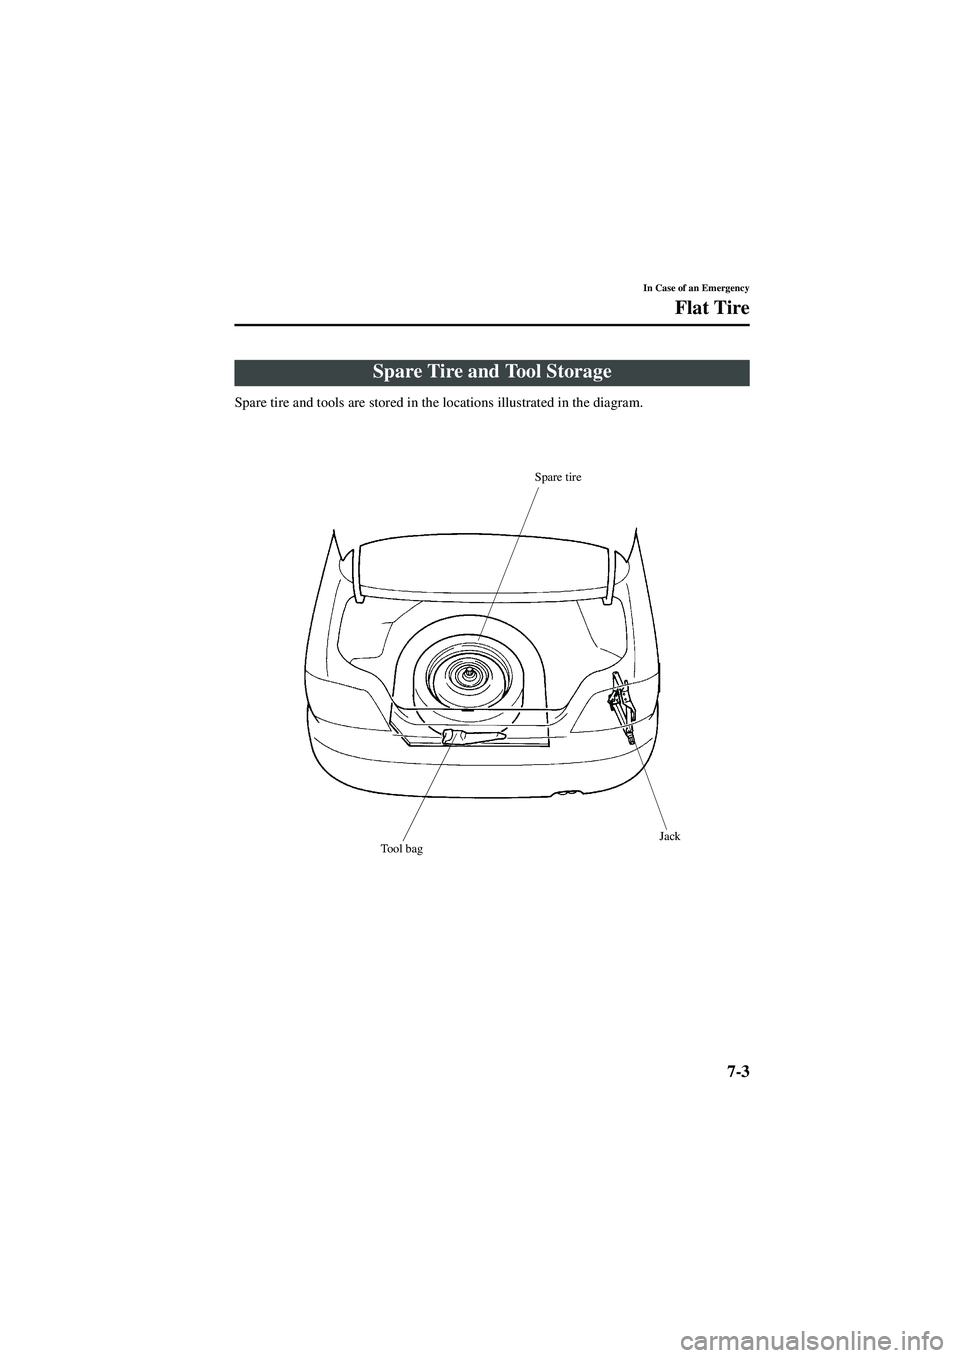 MAZDA MODEL 626 2002  Owners Manual 7-3
In Case of an Emergency
Form No. 8Q50-EA-01G
Flat Tire
Spare tire and tools are stored in the locations illustrated in the diagram.
Spare Tire and Tool Storage
Spare tire
Tool bag Jack
J94S.book  